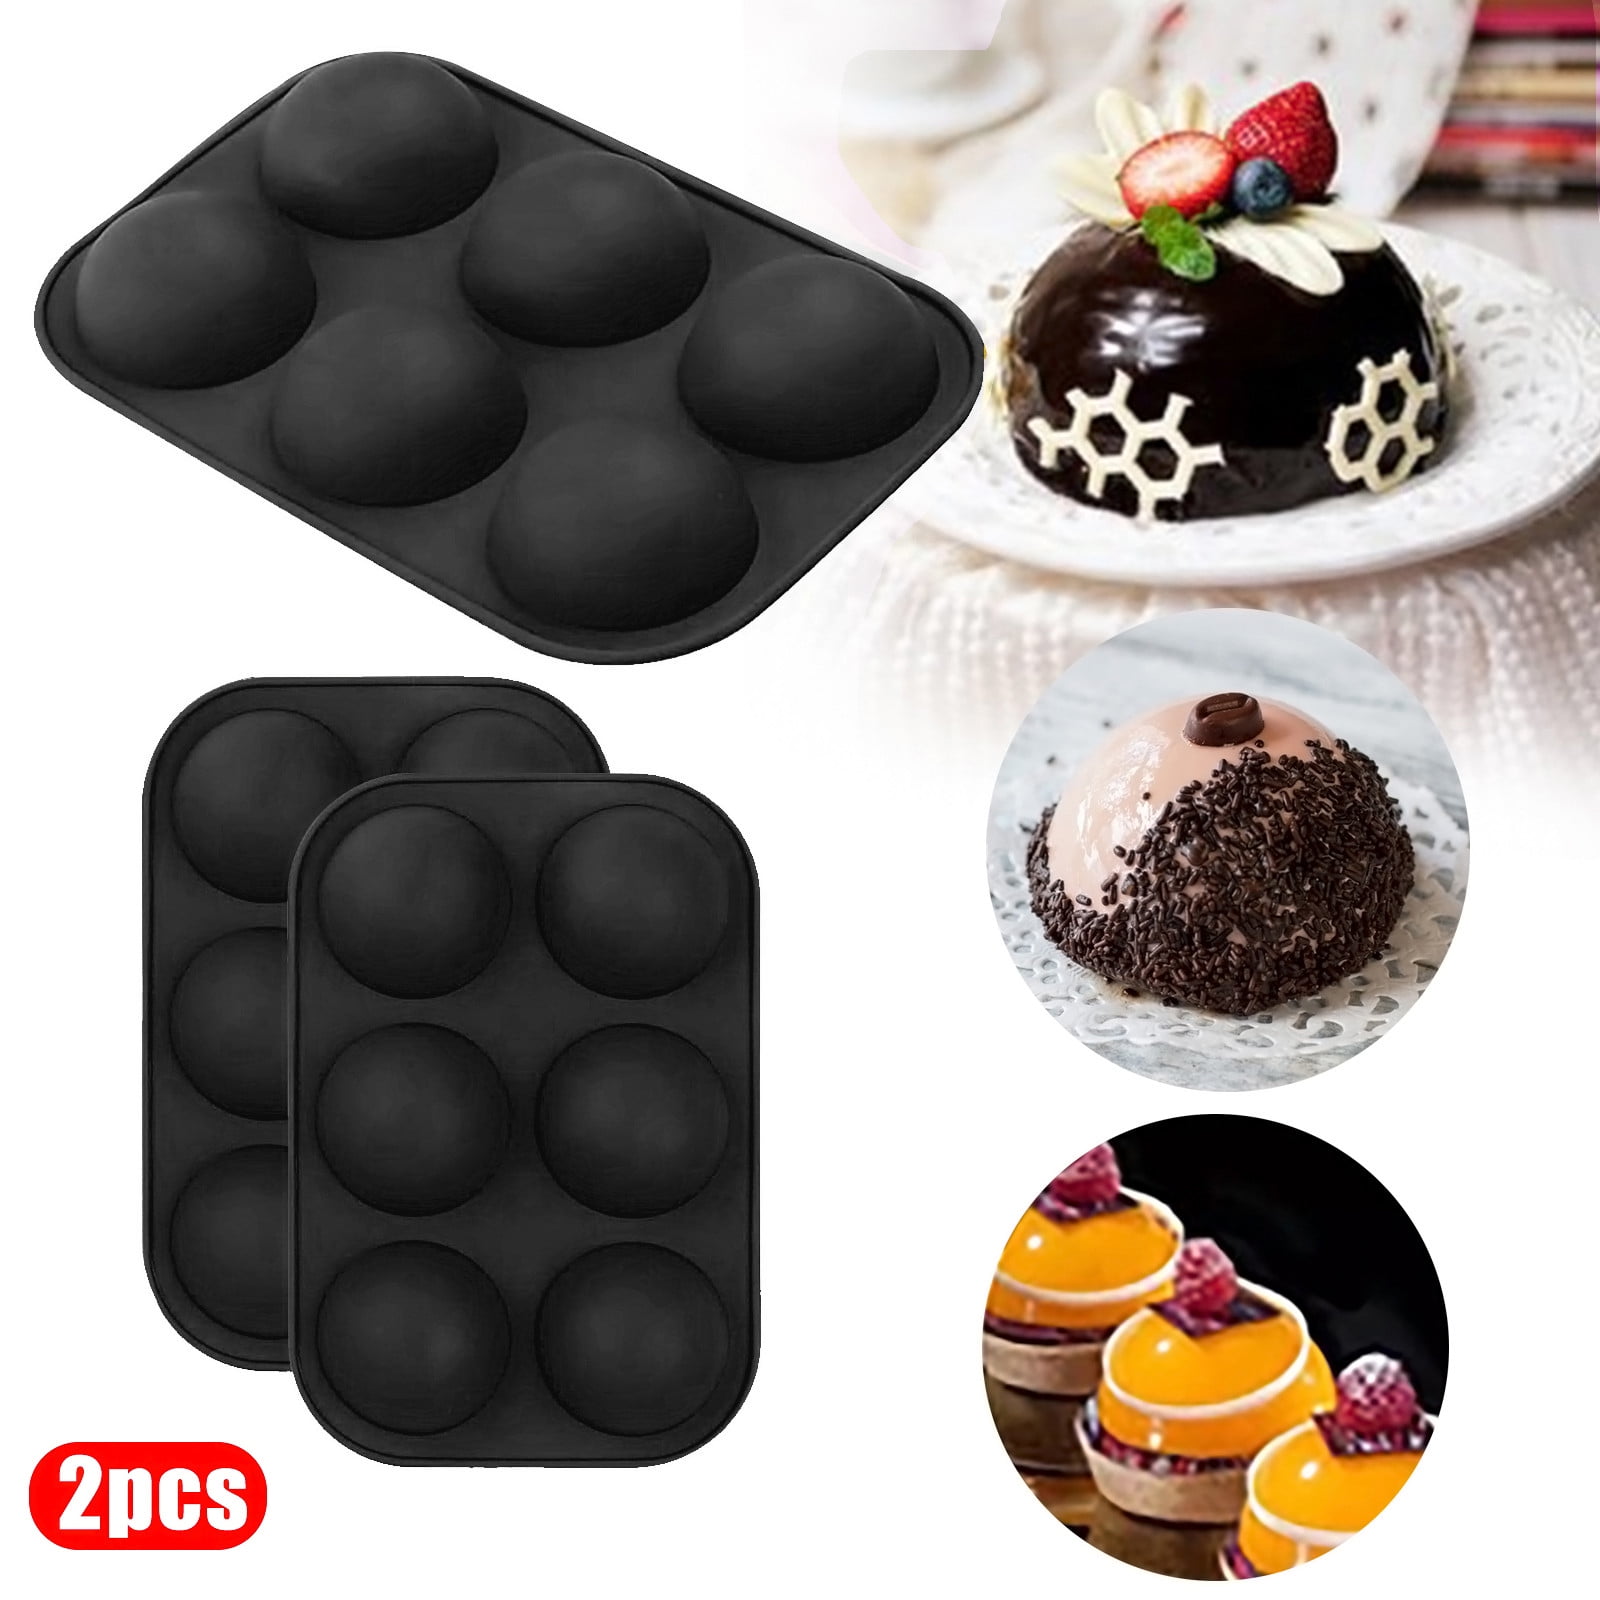 2 x Half Ball Sphere Silicone Cake Mold Muffin Chocolate Cookie Baking Mould rty 